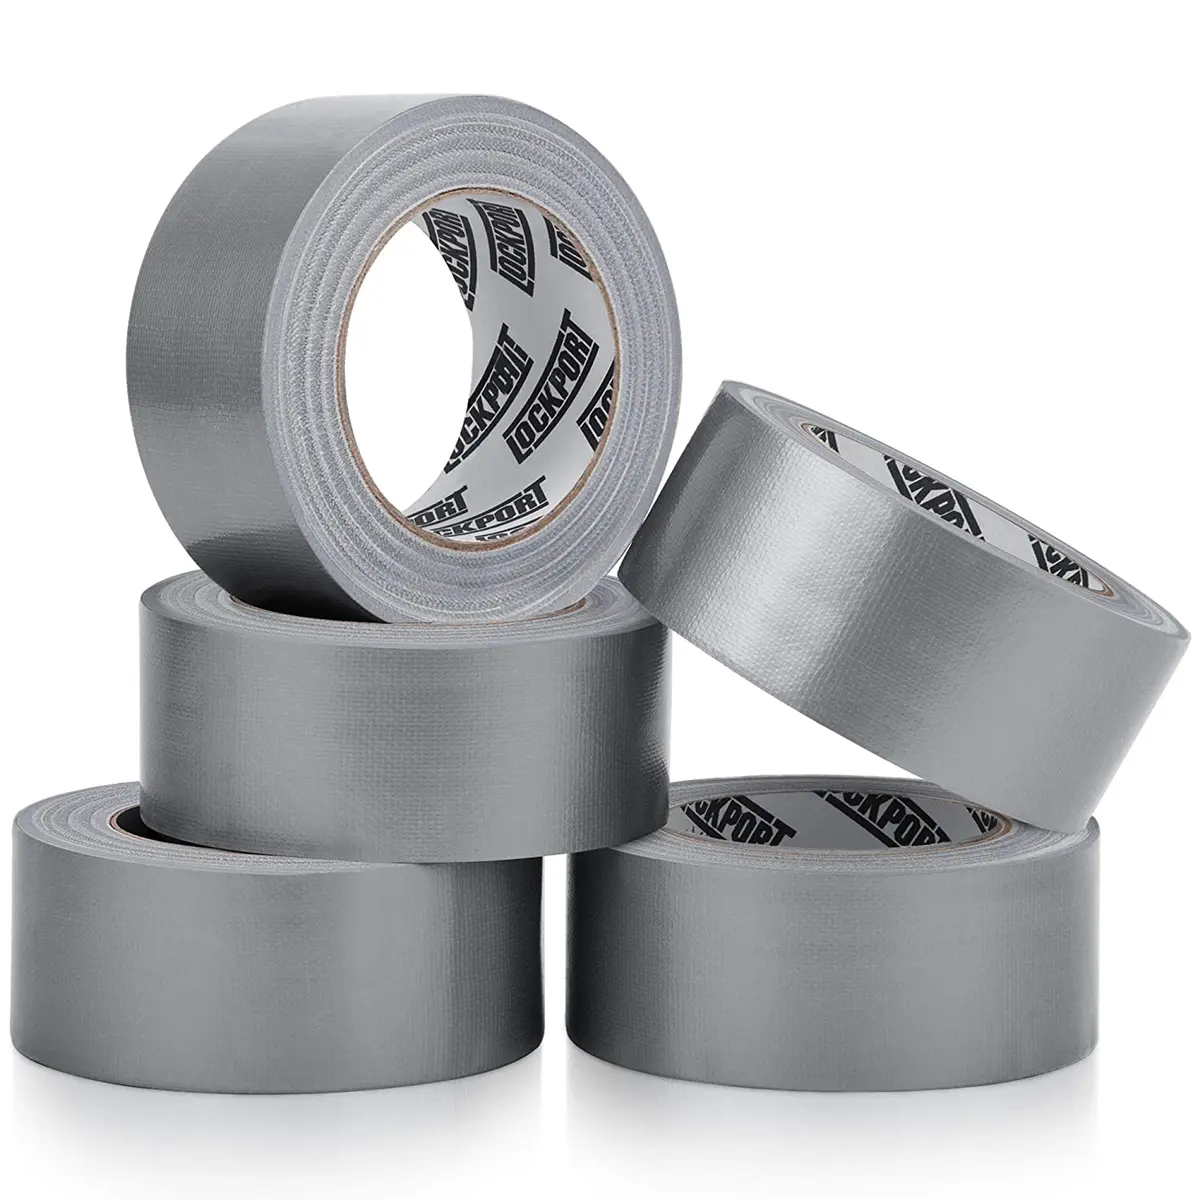 Duct Tape Heavy Duty - 5 Roll Multi Pack - Silver 90 Feet X 2 Inch -  Strong, Fle